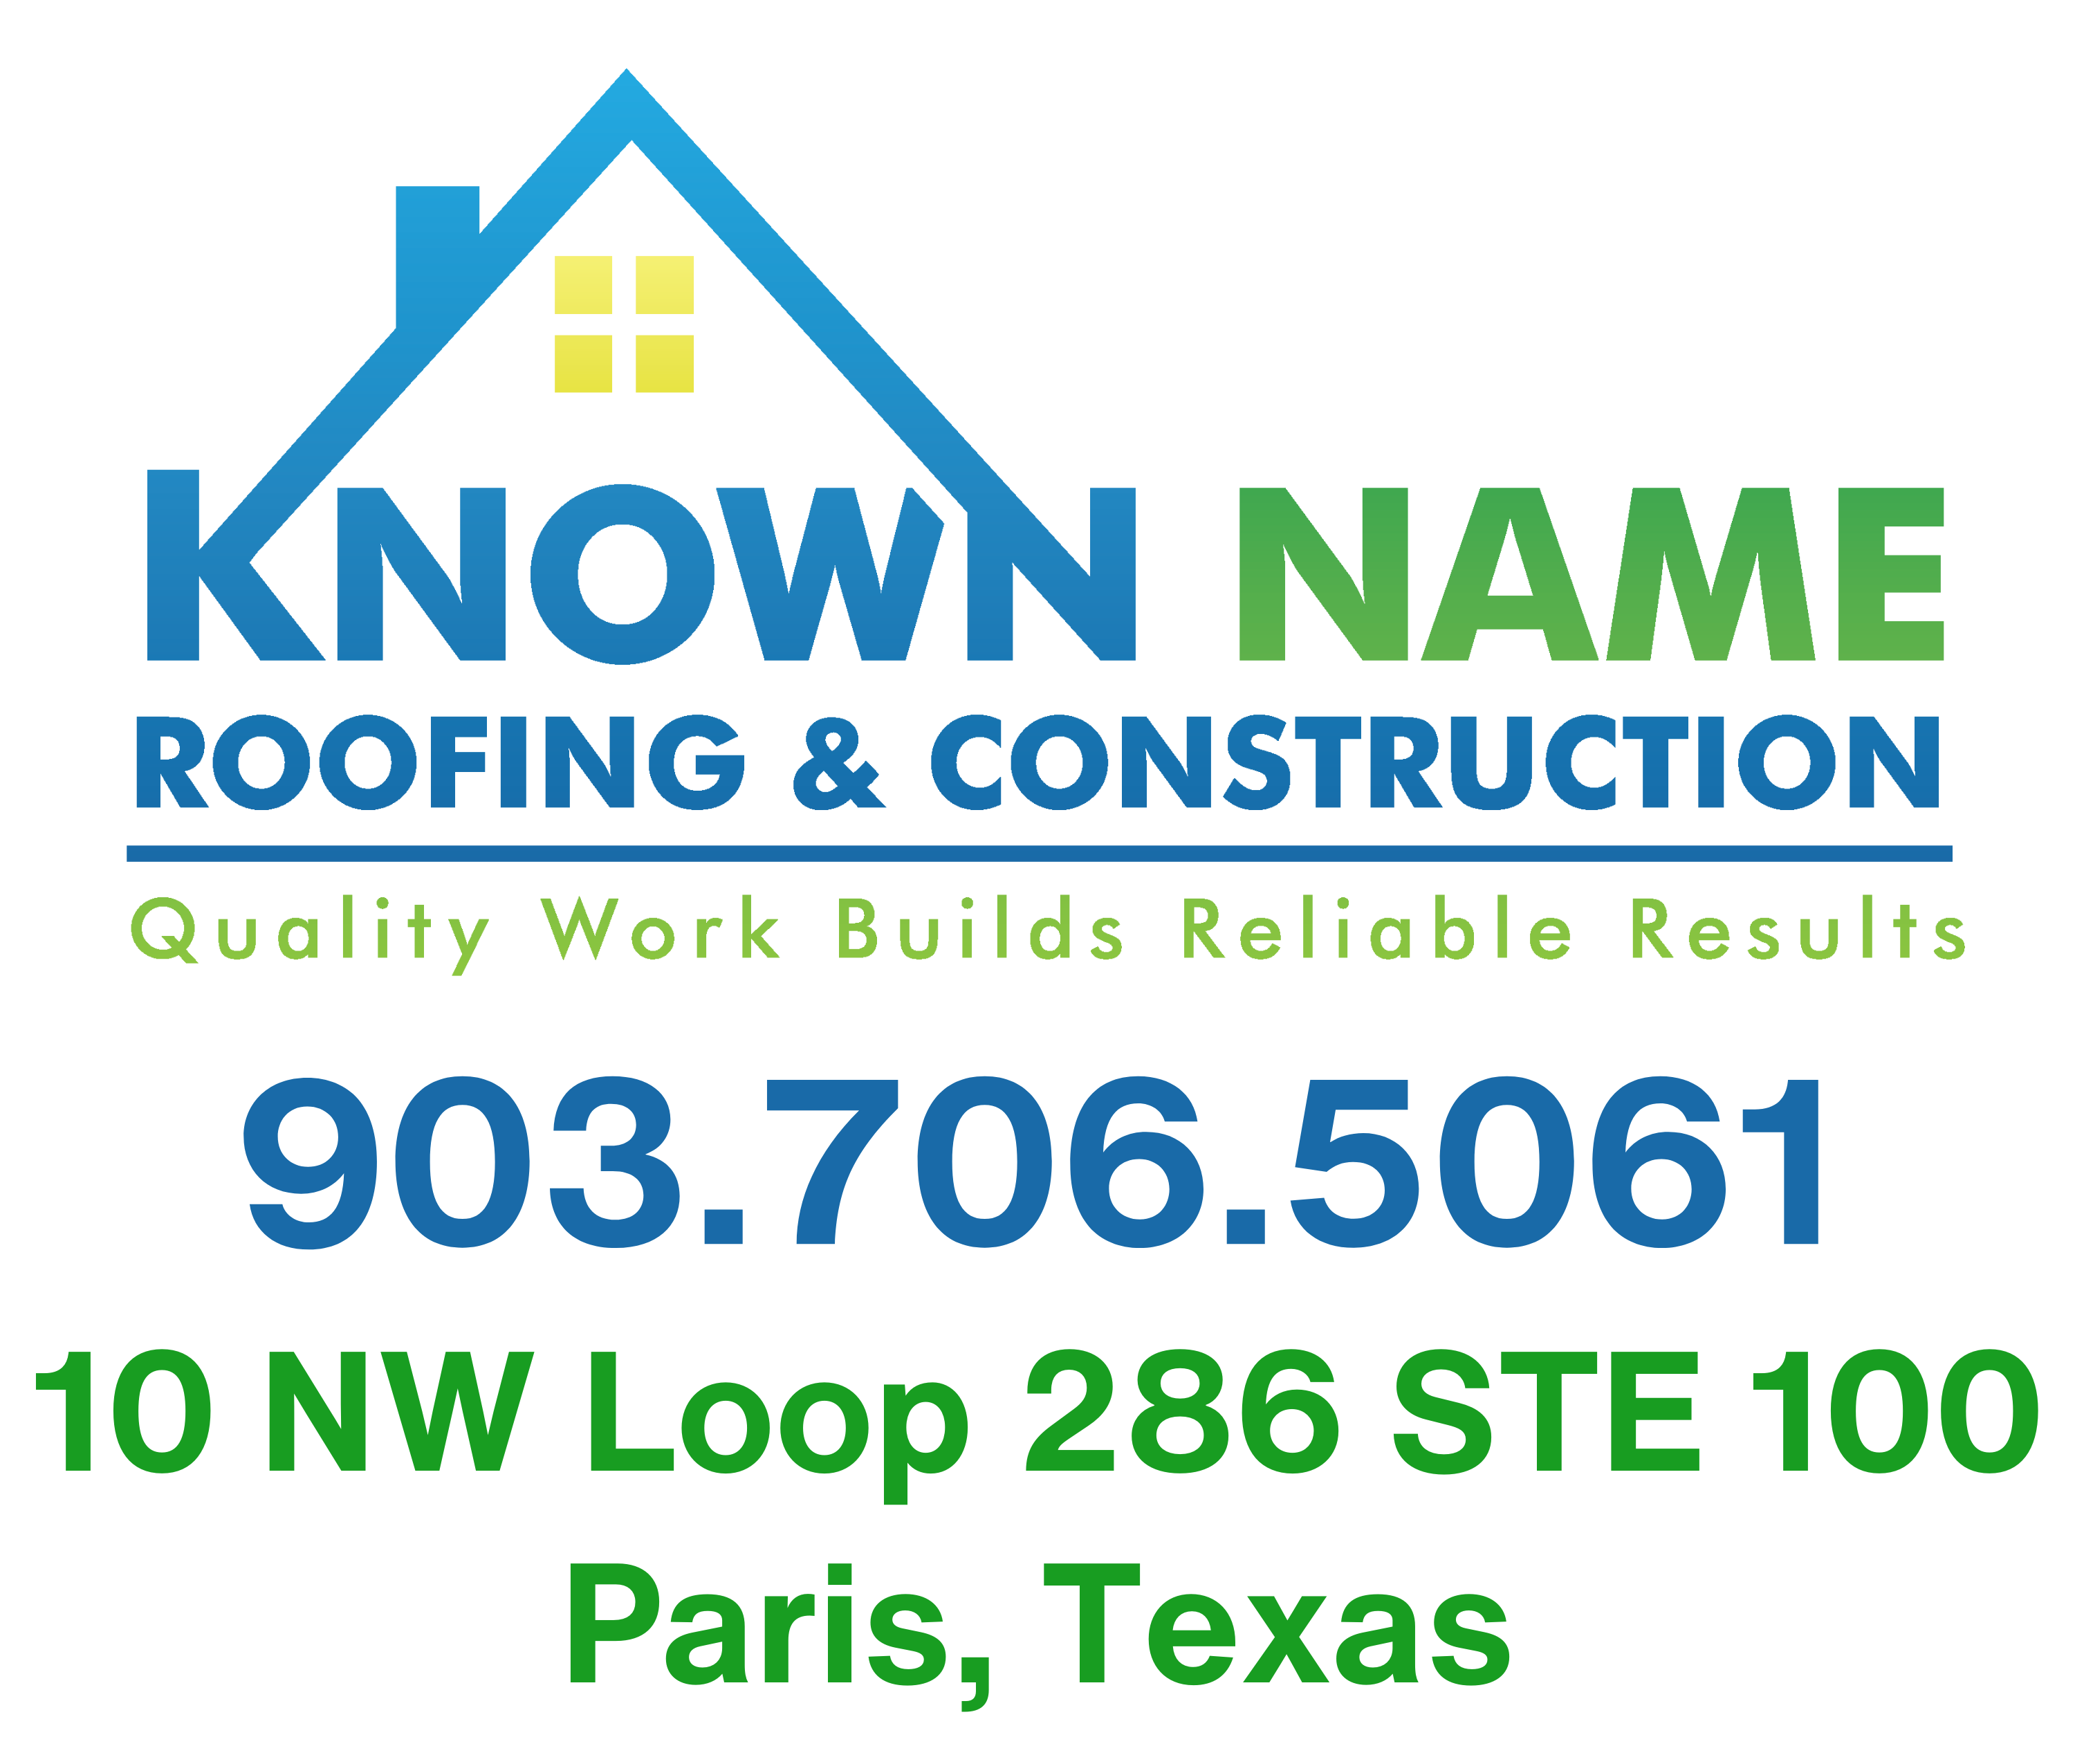 Known Name Roofing Logo with information